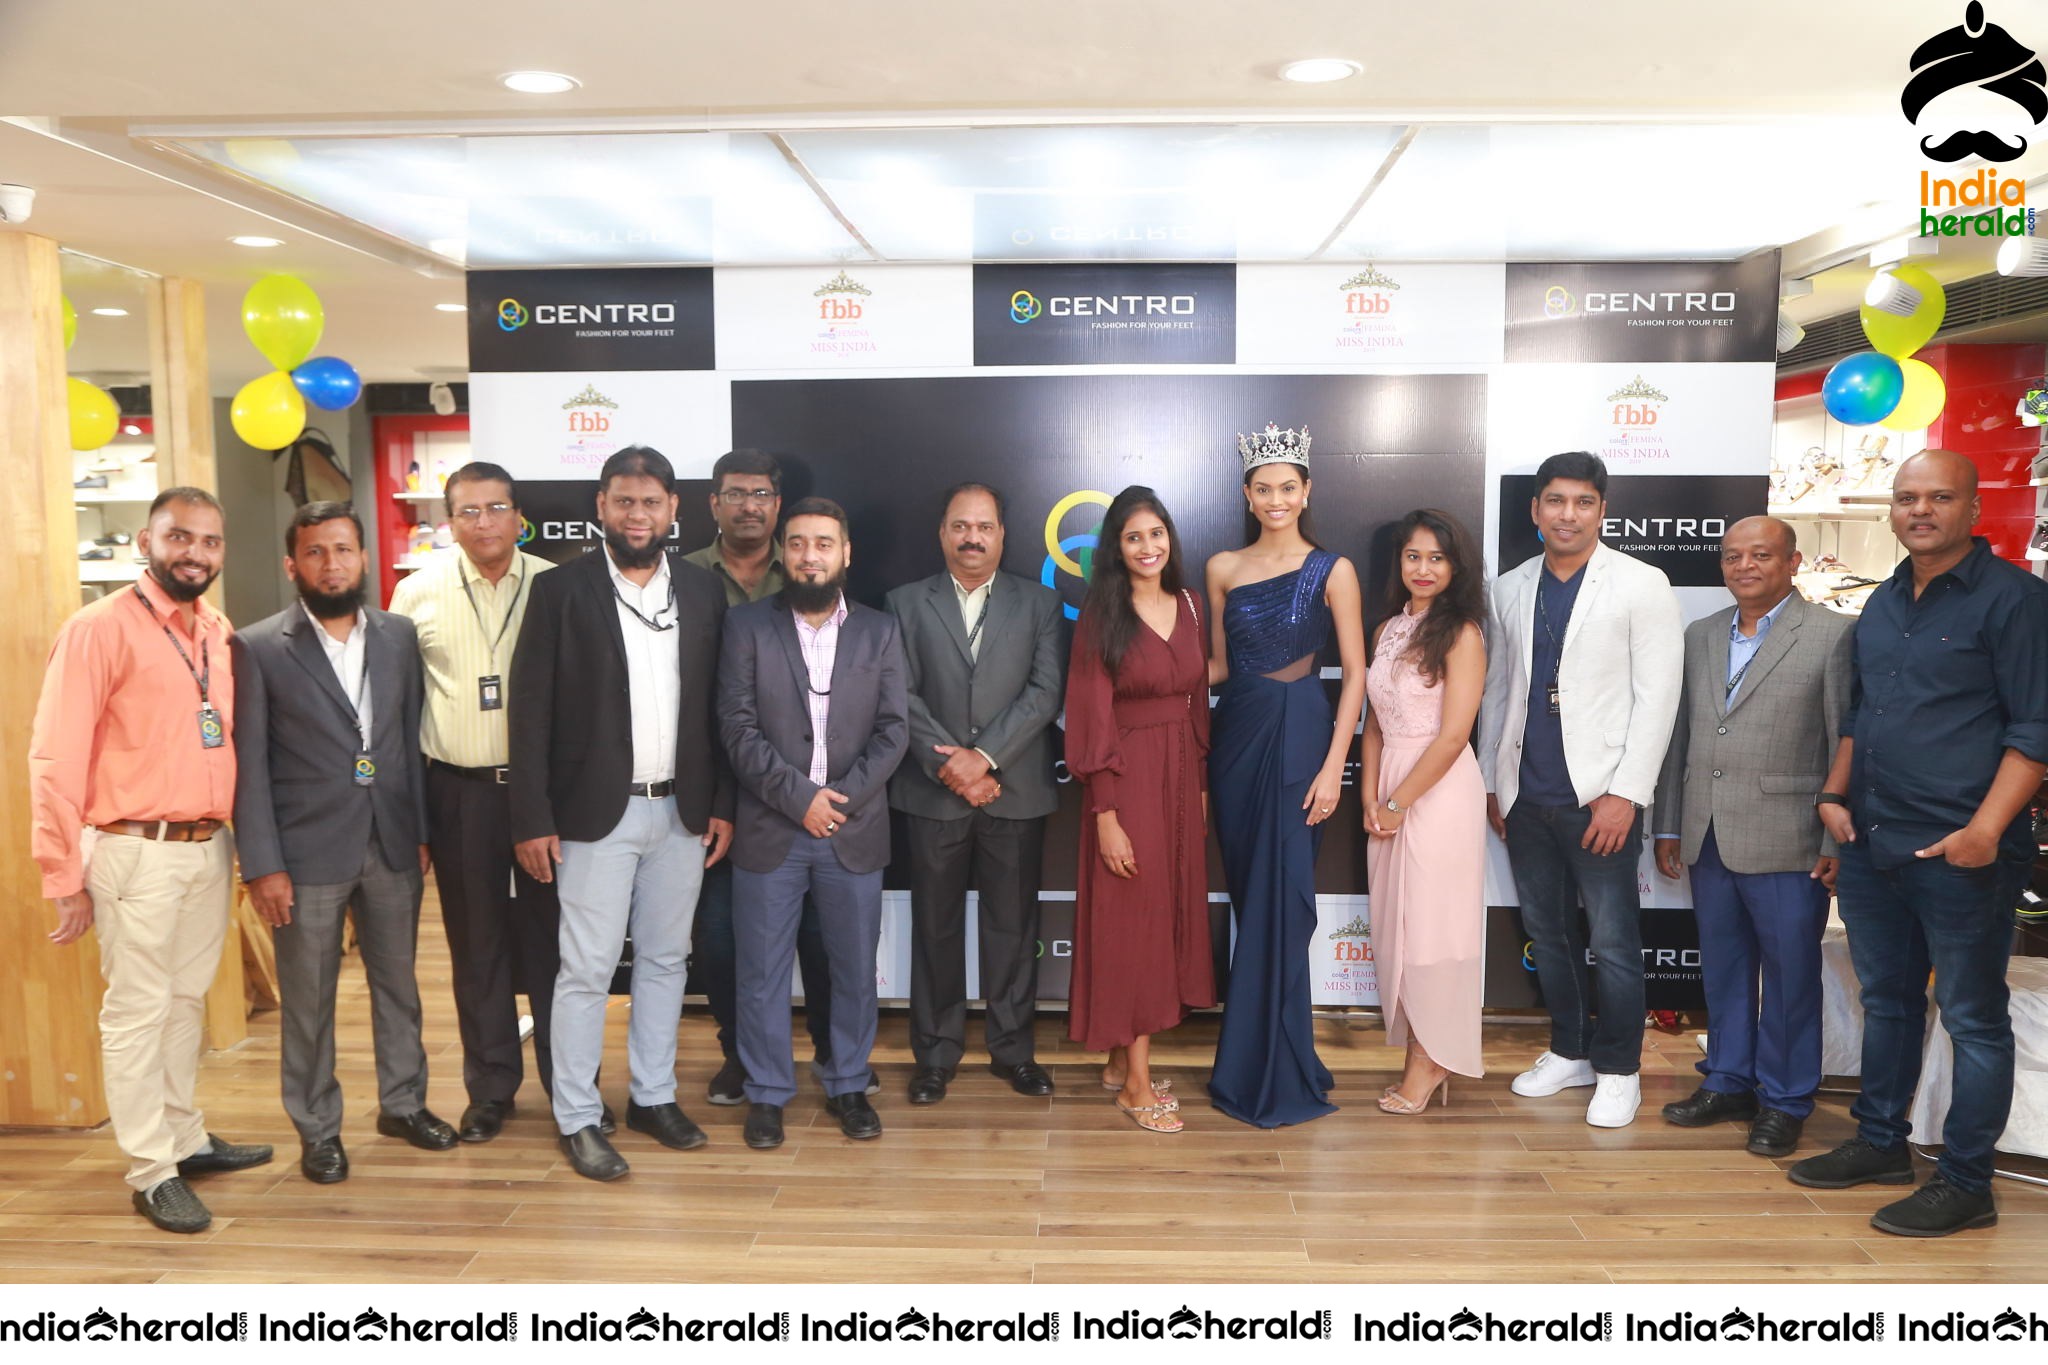 Miss India 2019 Suman Rao Winner Unveiled Wedding And Festive Footwear Collection At Centro Set 2